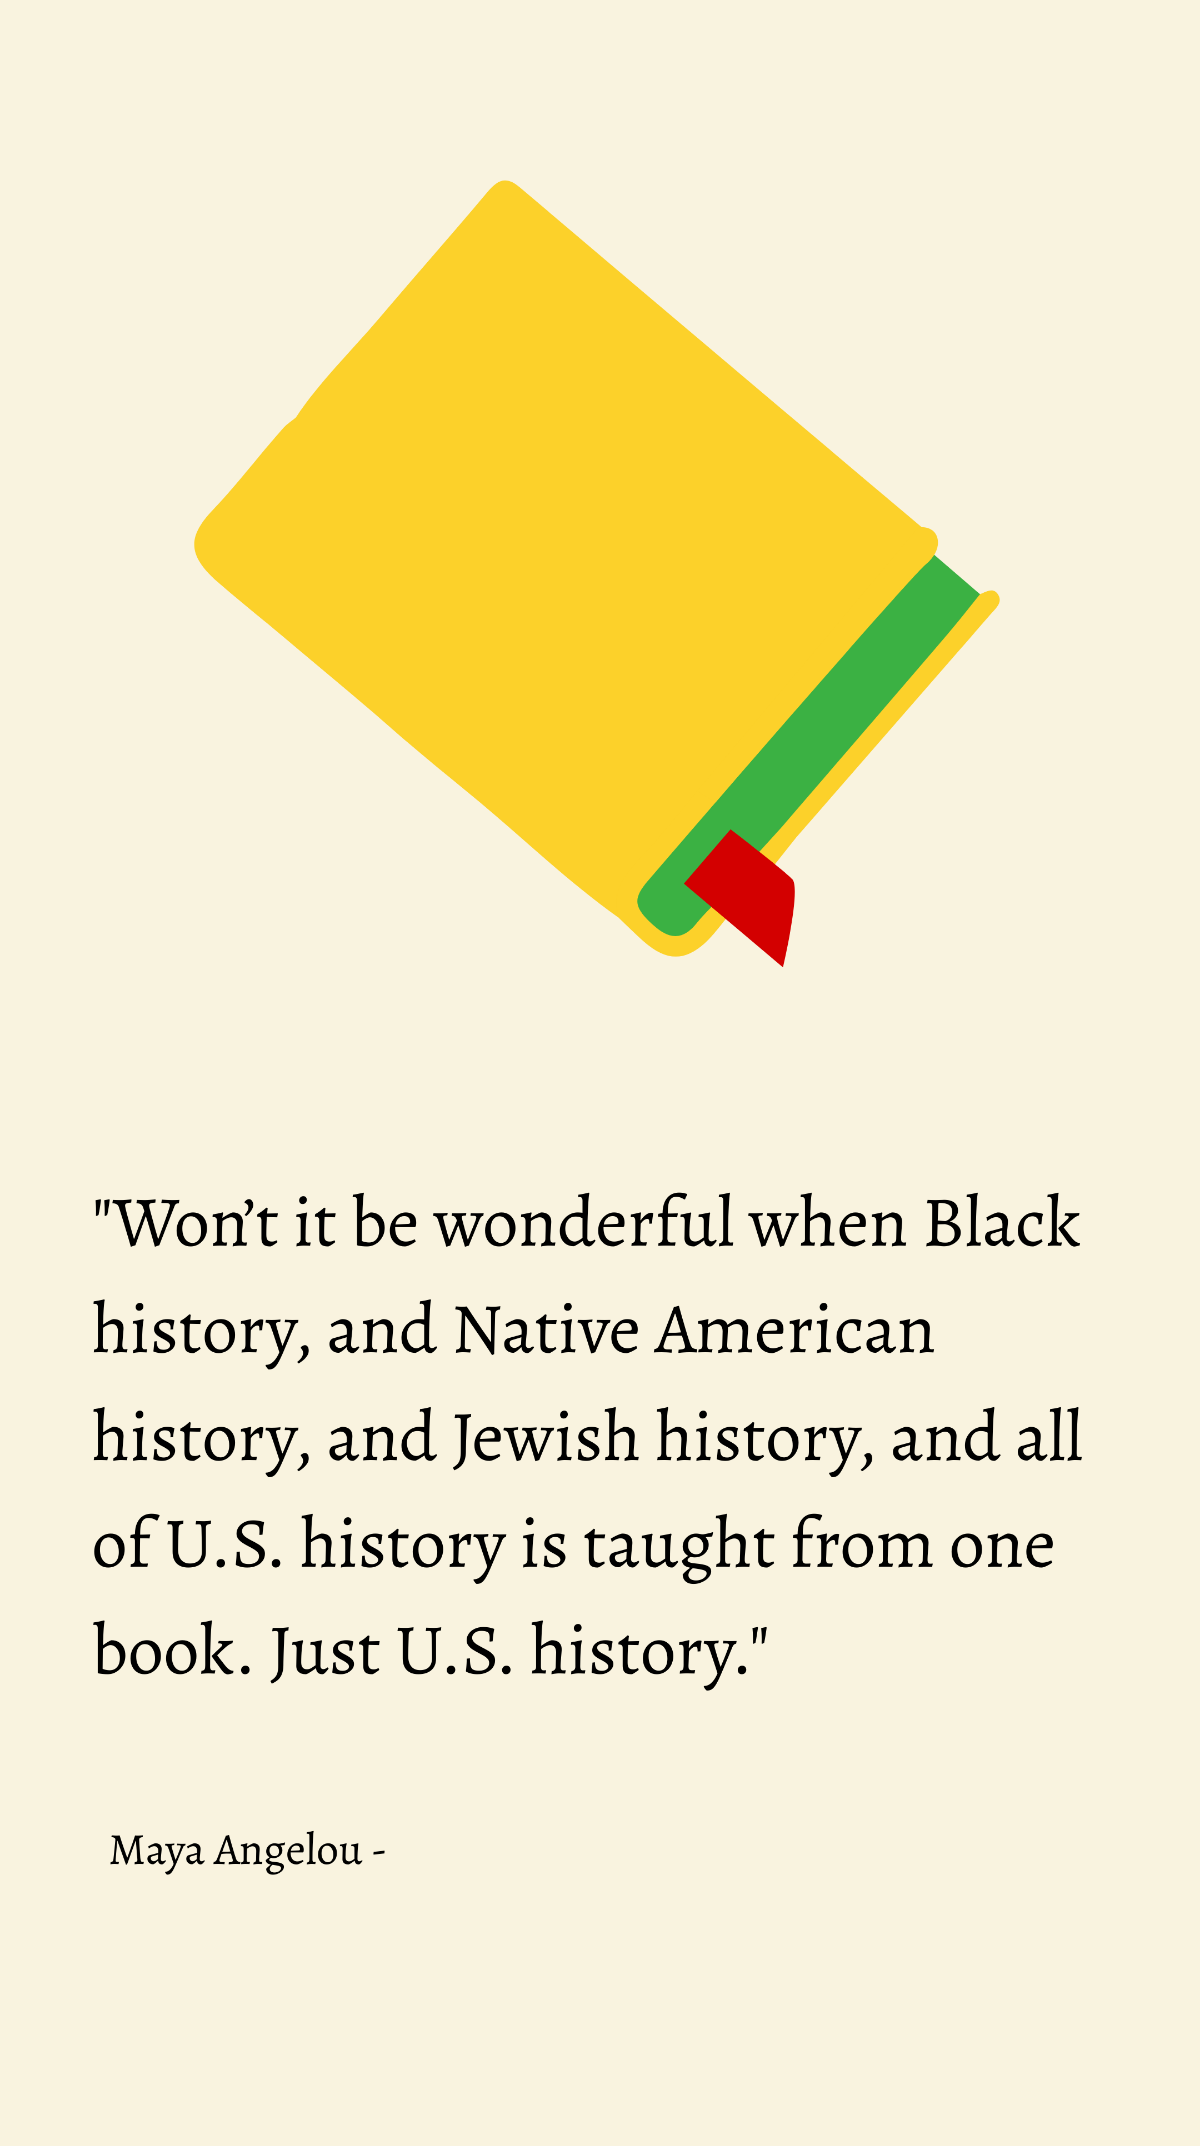 Maya Angelou - Won’t it be wonderful when Black history, and Native American history, and Jewish history, and all of U.S. history is taught from one book. Just U.S. history. Template